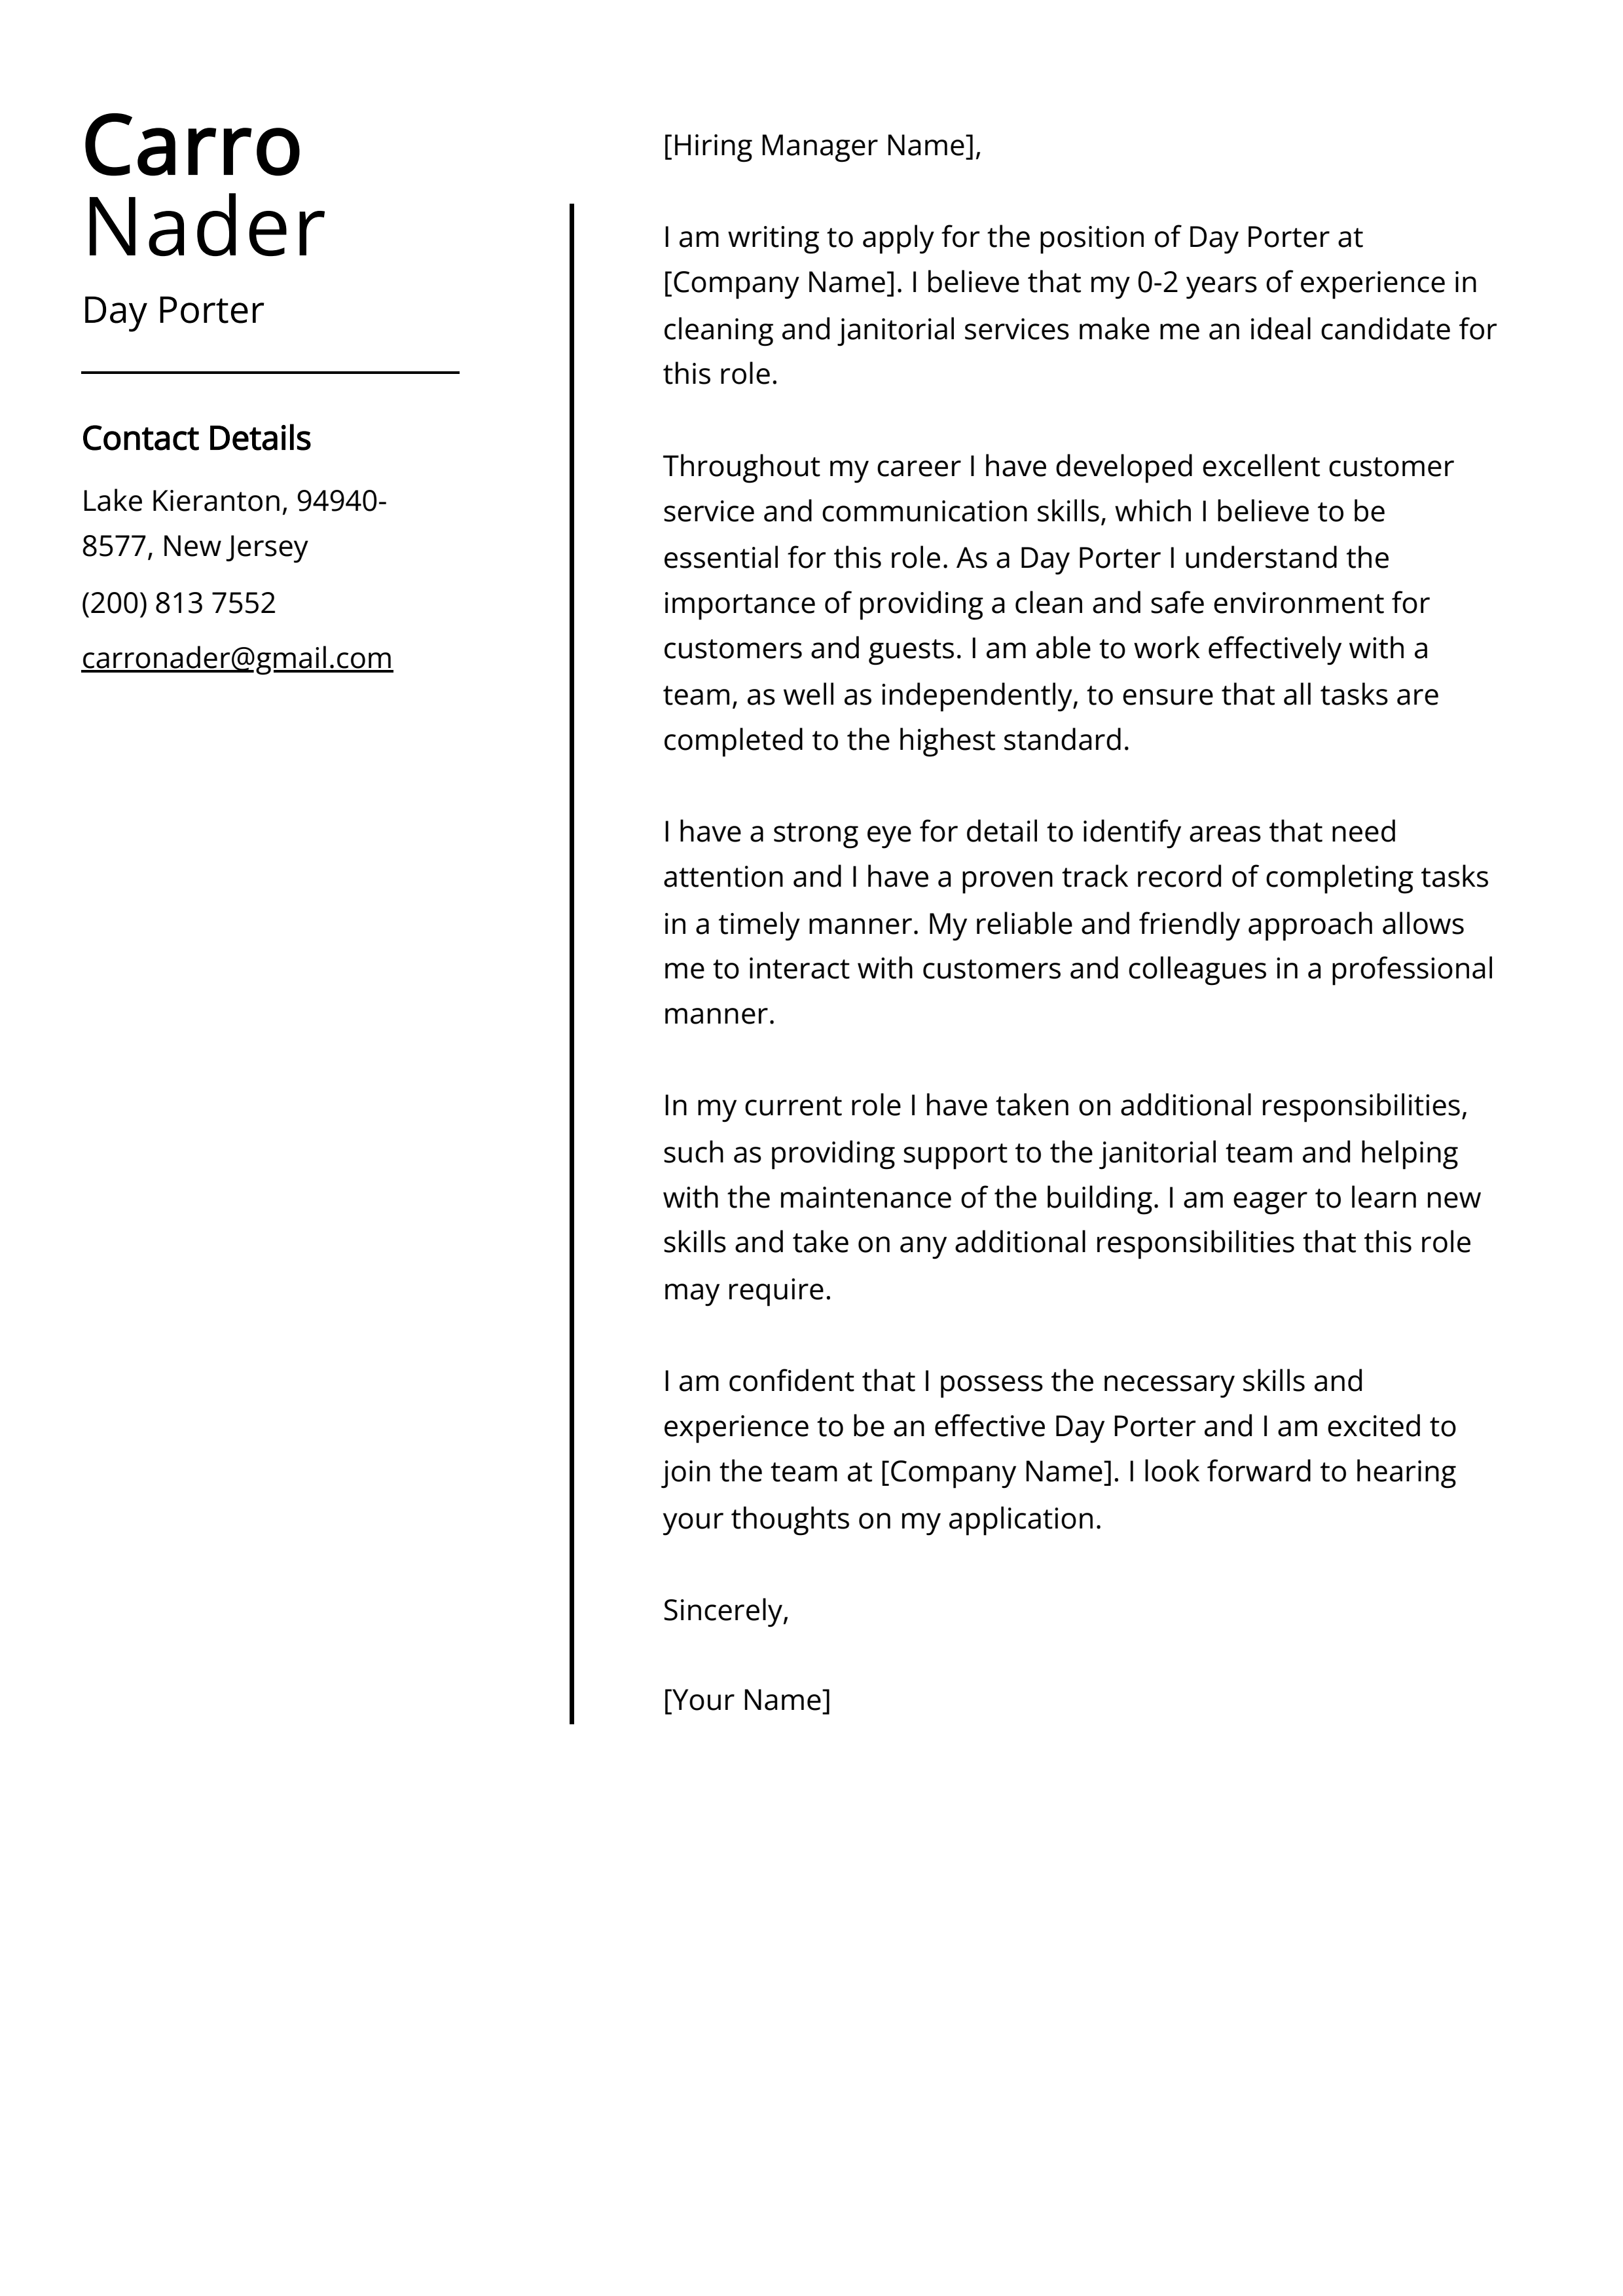 Day Porter Cover Letter Example